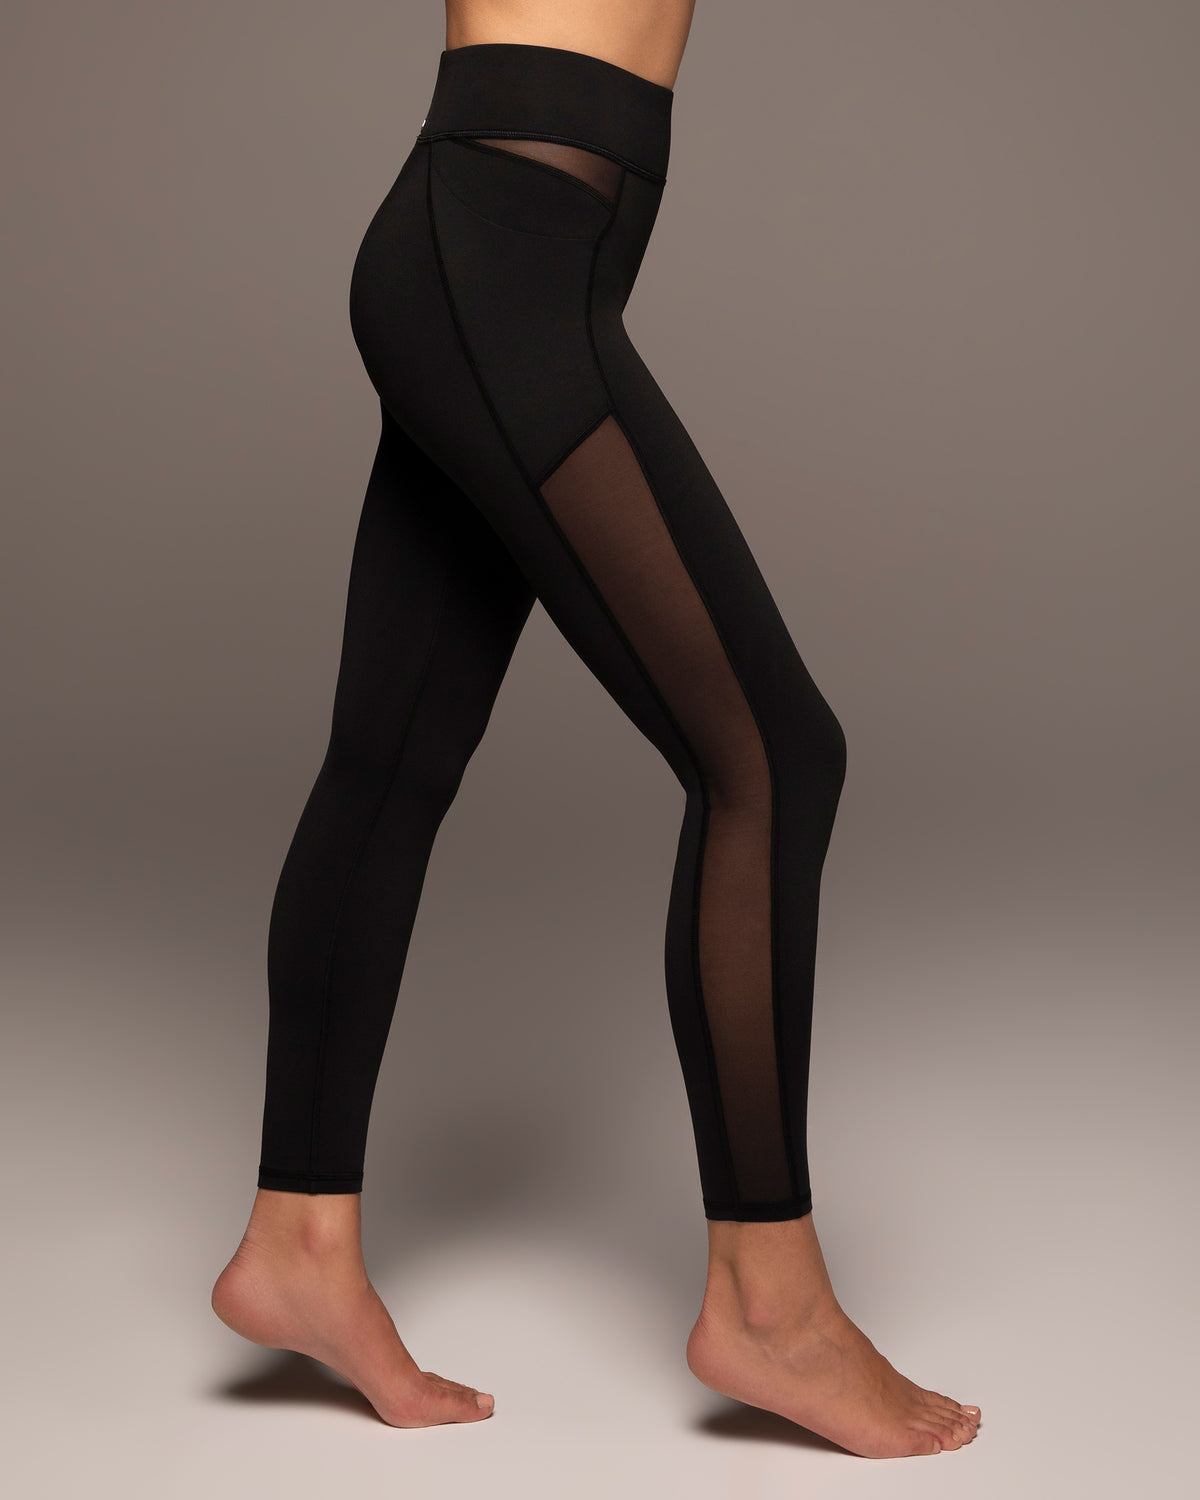 Review of CRZ YOGA Leggings, Lululemon Align Tights Dupe | Checkout – Best  Deals, Expert Product Reviews & Buying Guides